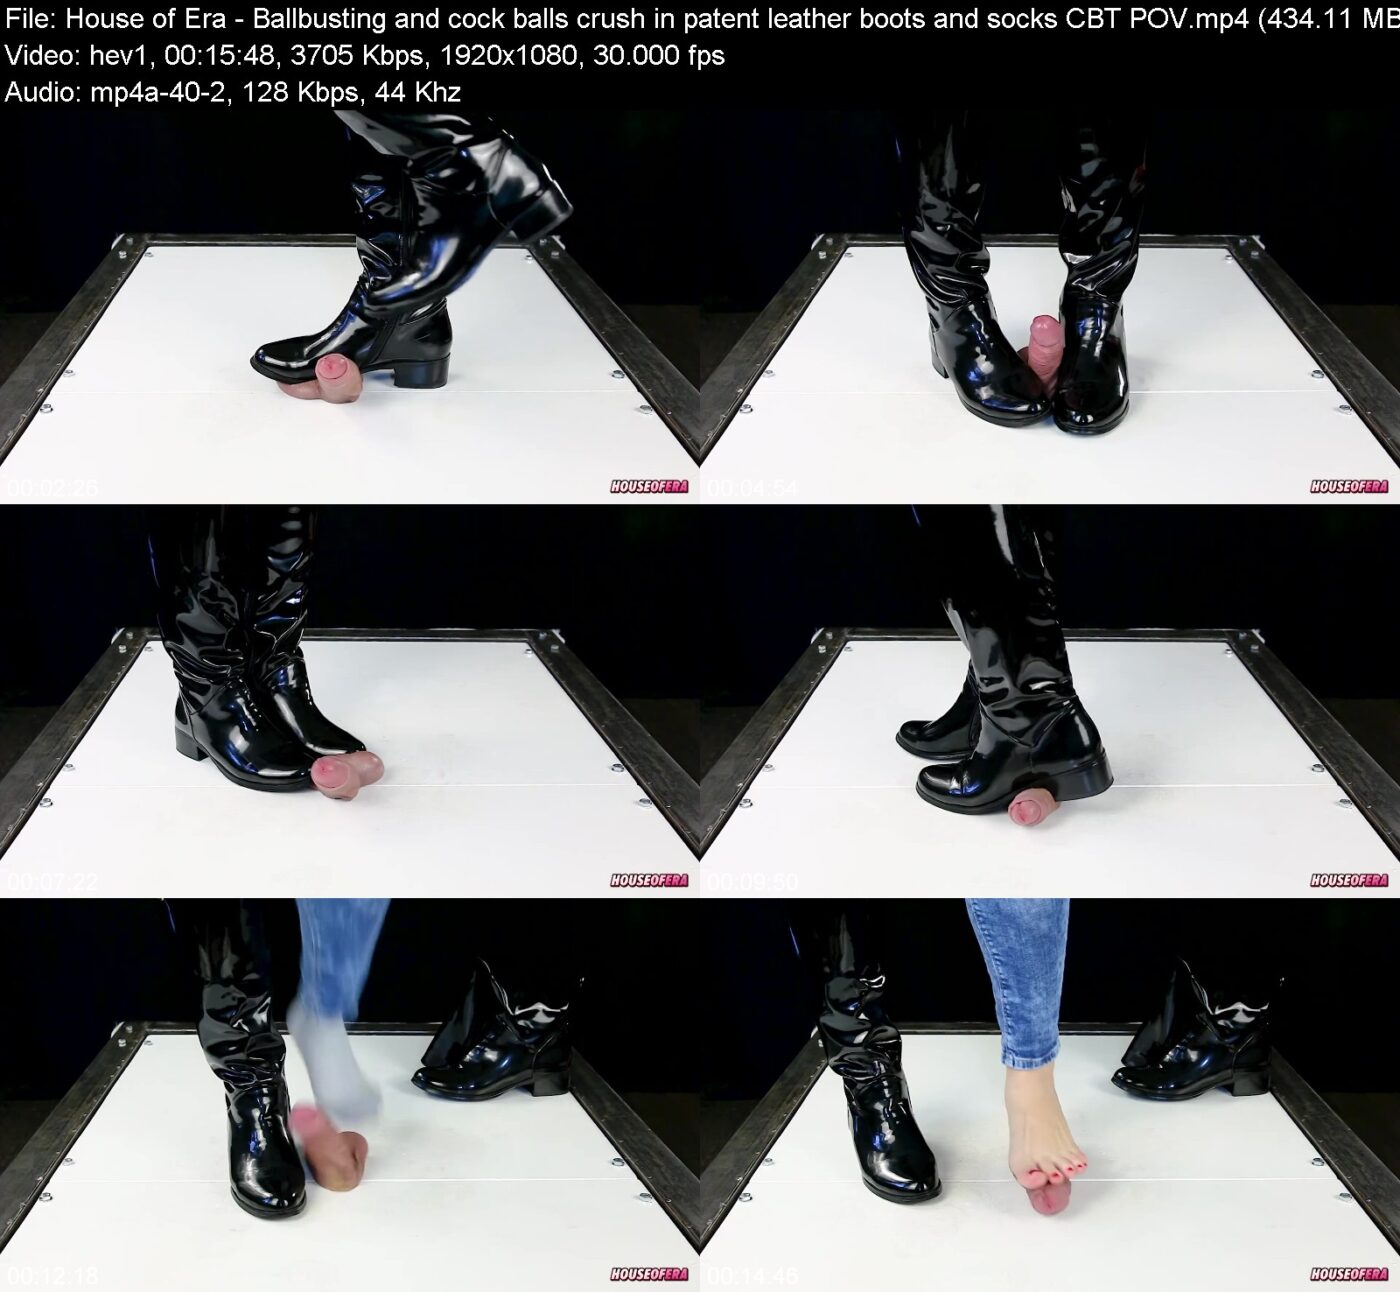 House of Era in Ballbusting & cock balls crush in patent leather boots & socks CBT POV